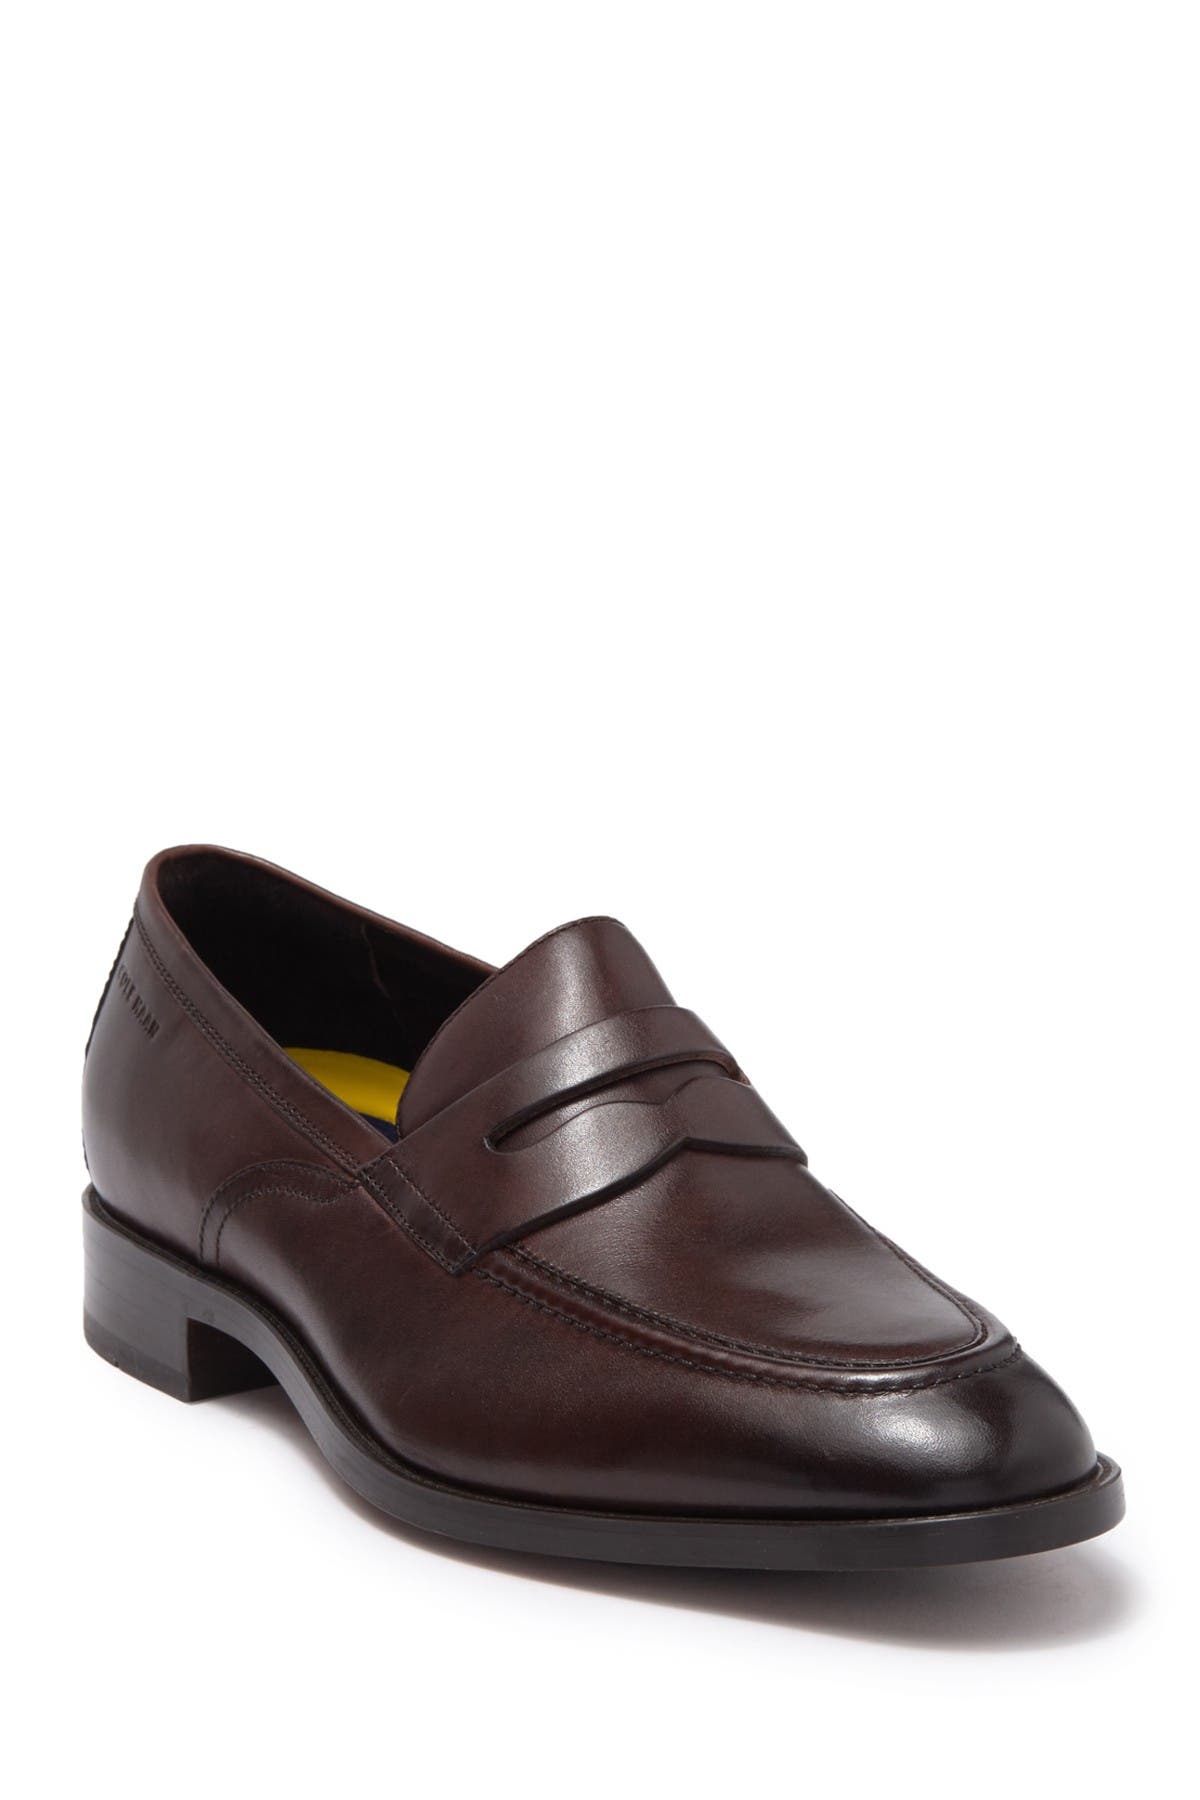 Cole Haan HAWTHORNE PENNY LOAFER